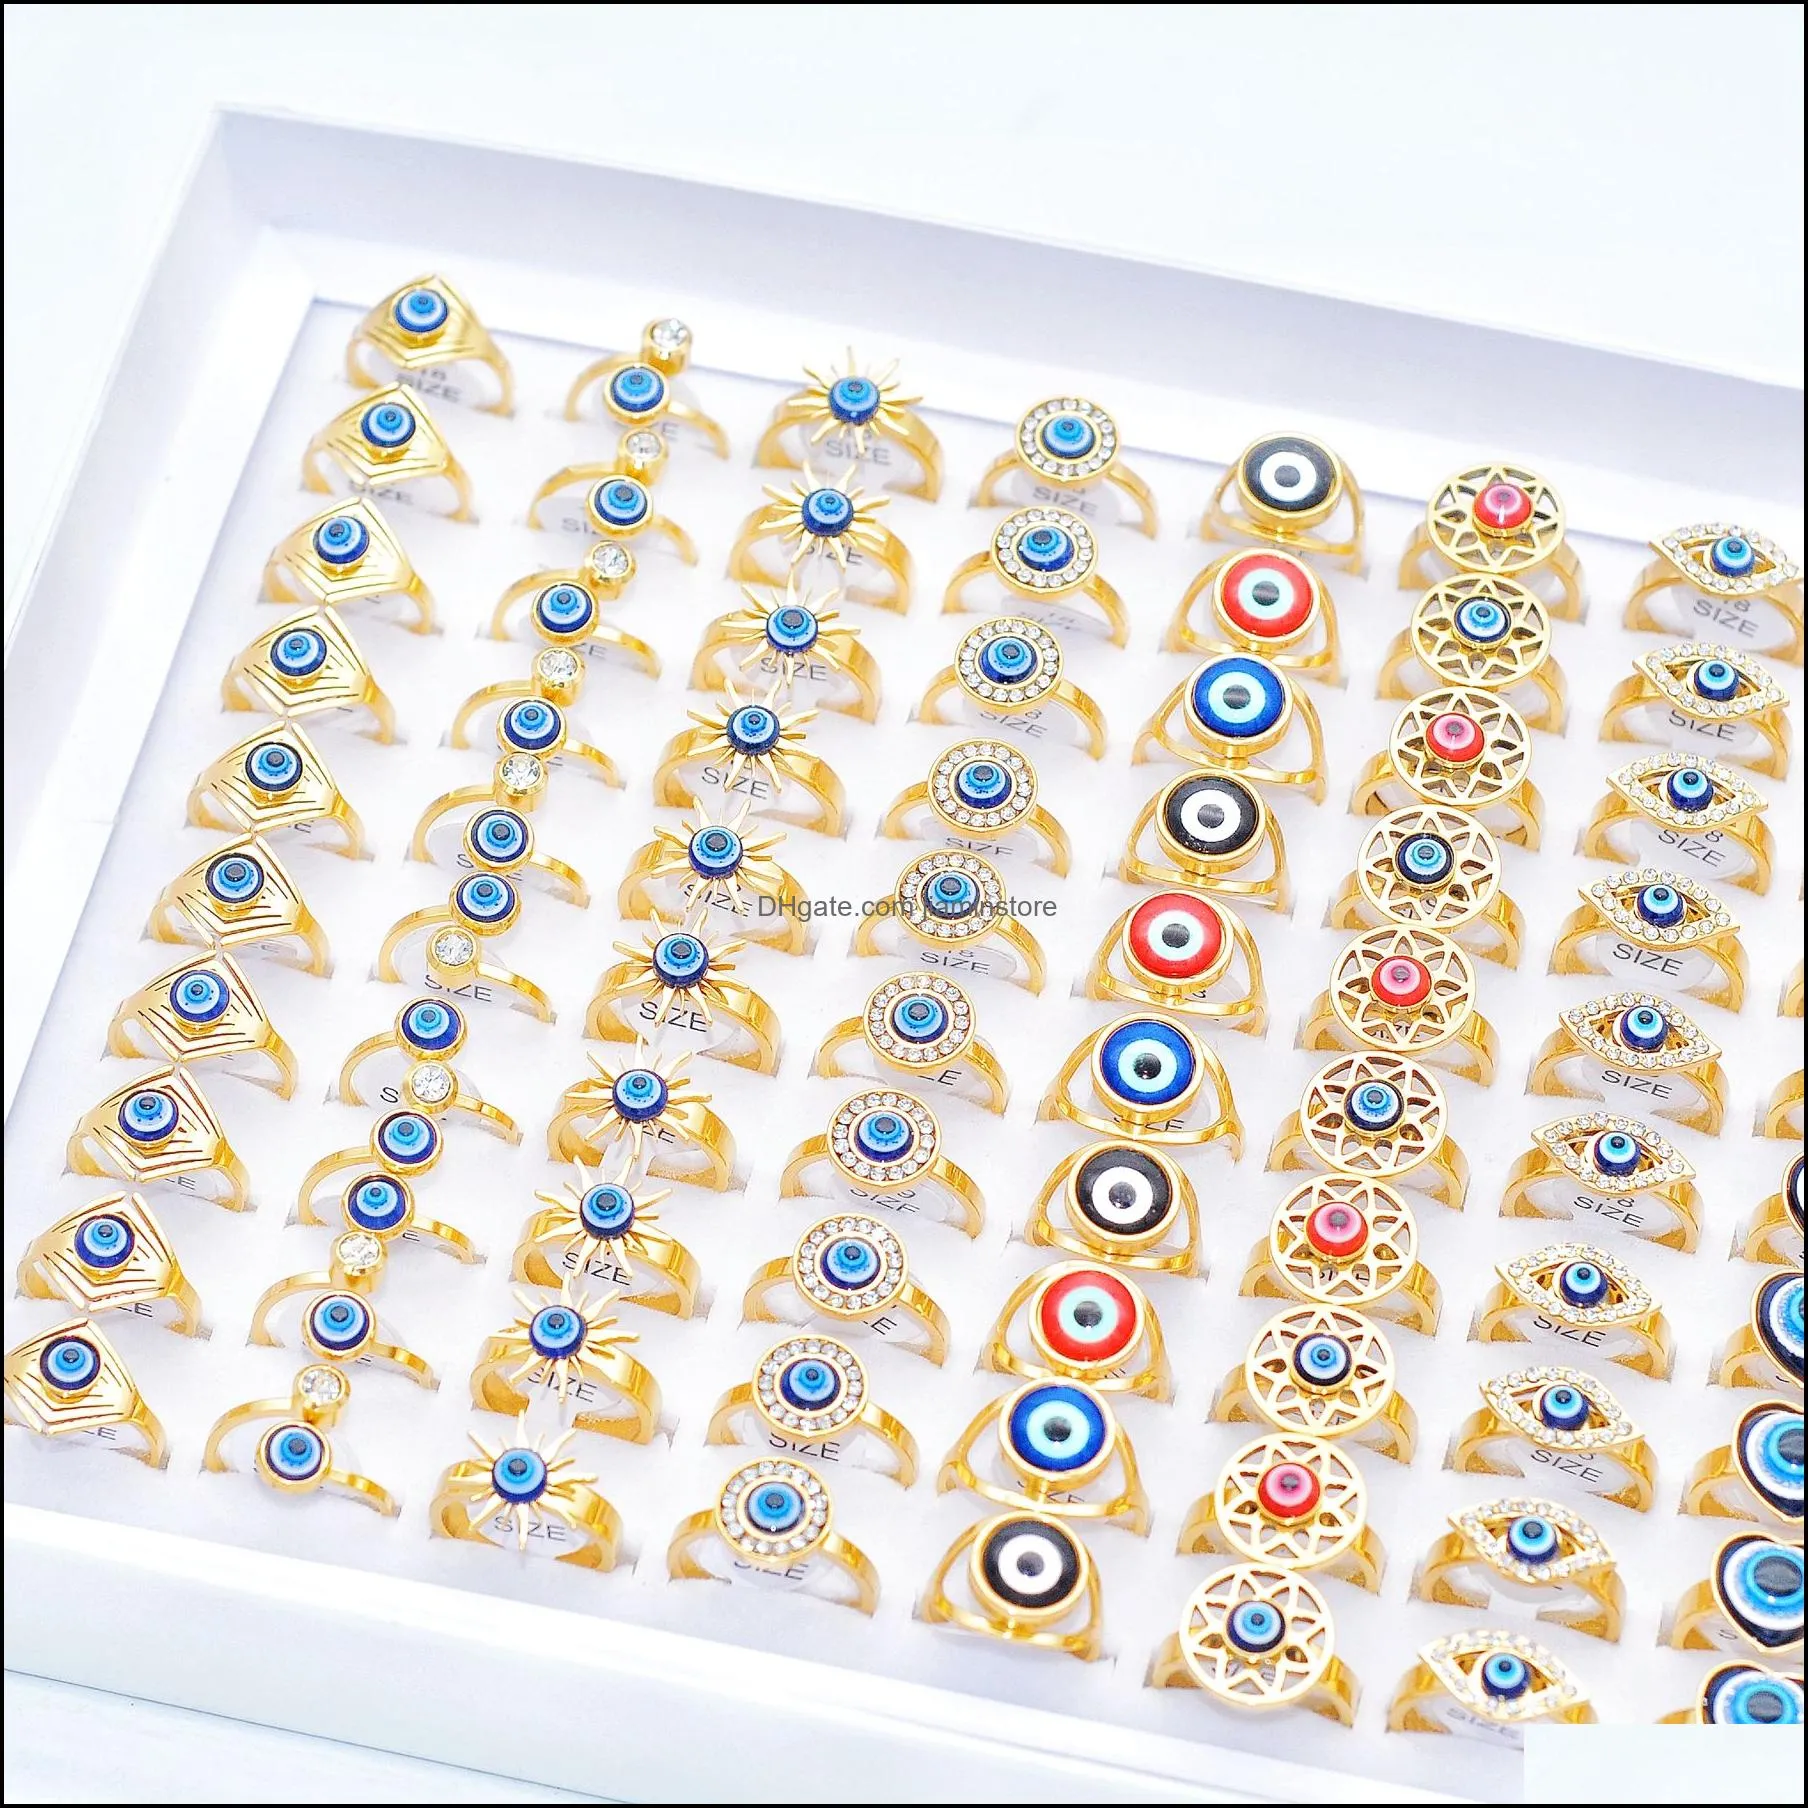 bulk wholesale 30pcs top assorted evil eye rings gold plated stainless steel women men wedding punk rock personality jewelry